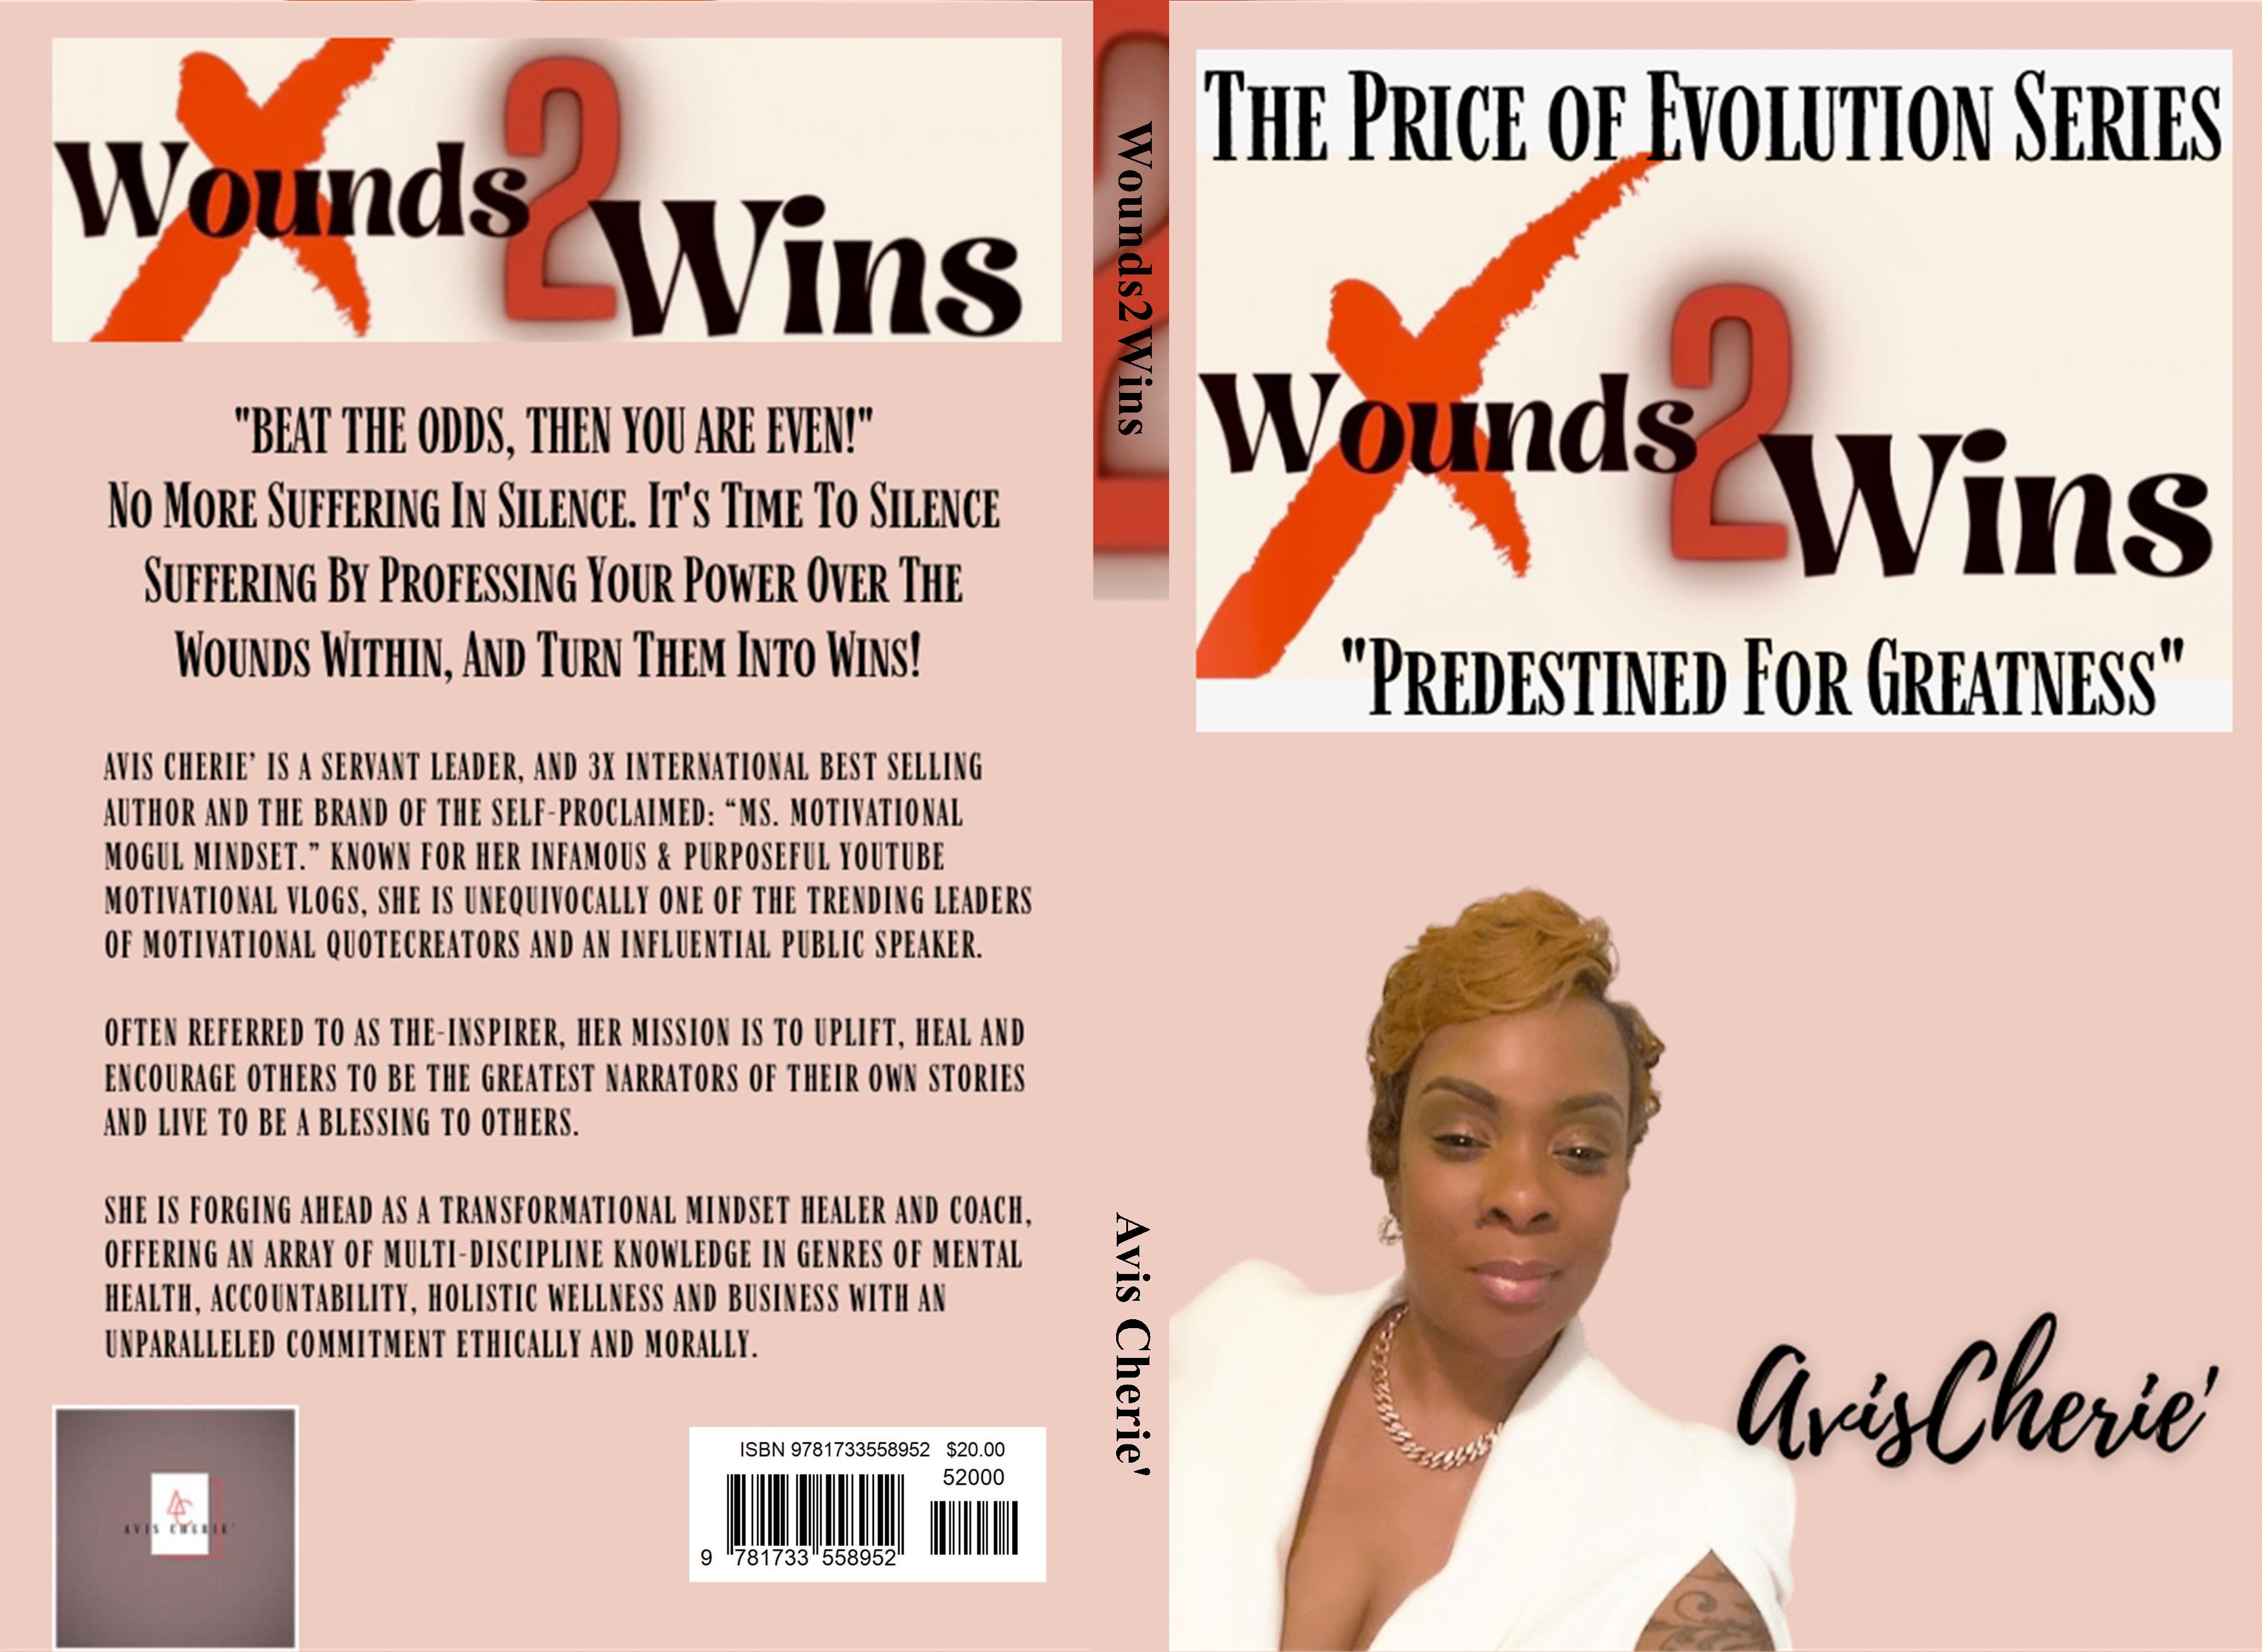 "WOUNDS 2 WINS: PREDESTINED FOR GREATNESS" cover image